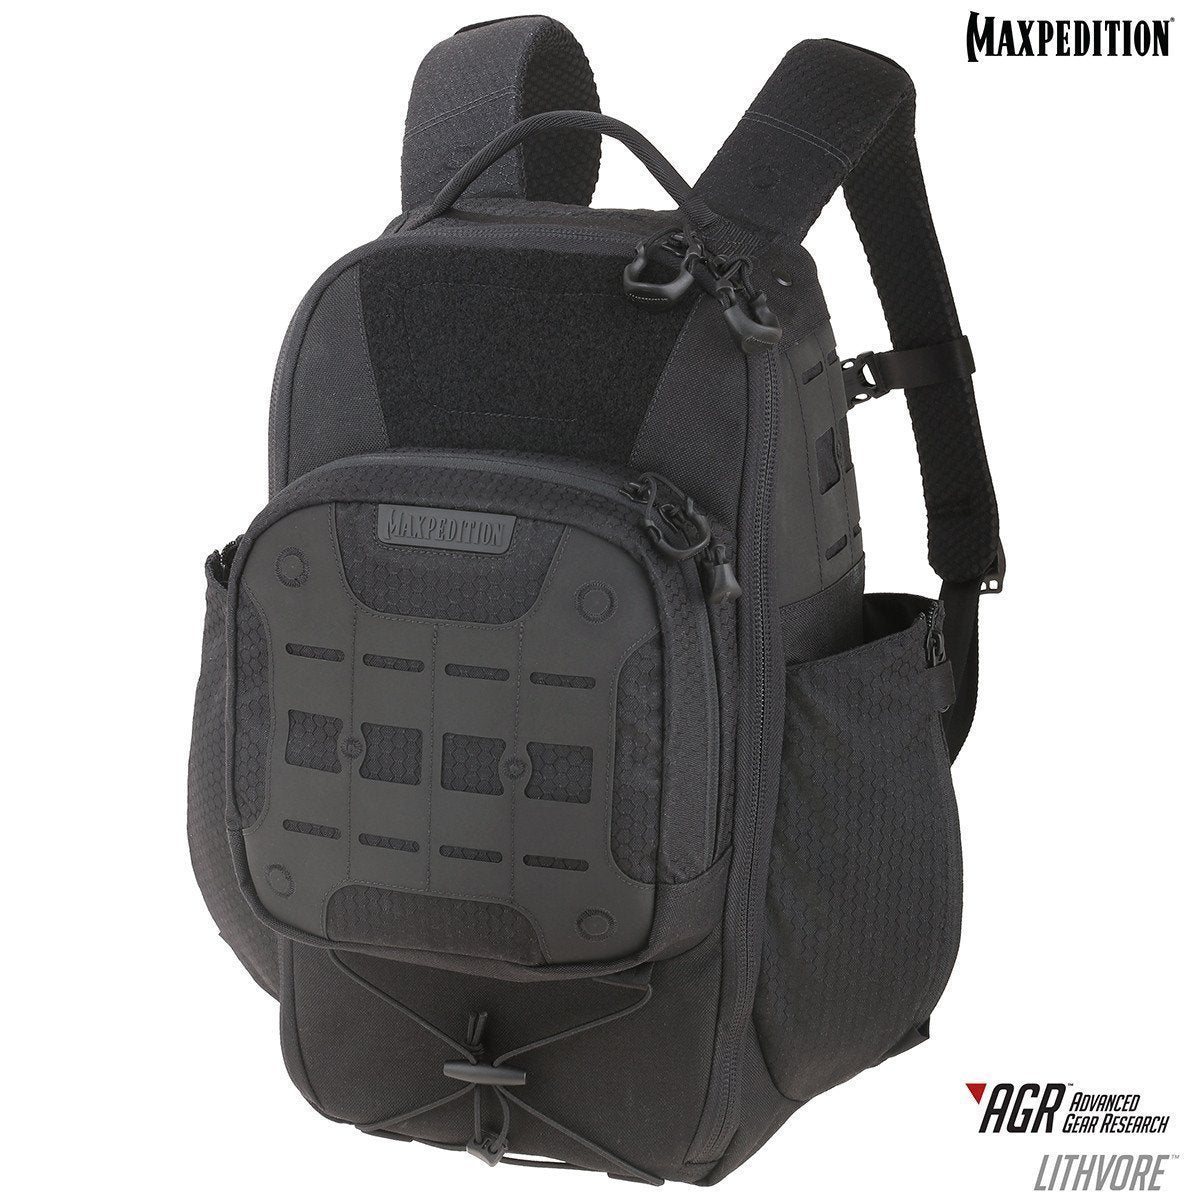 Maxpedition Lithvore Everyday Backpack 17L Backpacks Maxpedition Black Tactical Gear Supplier Tactical Distributors Australia